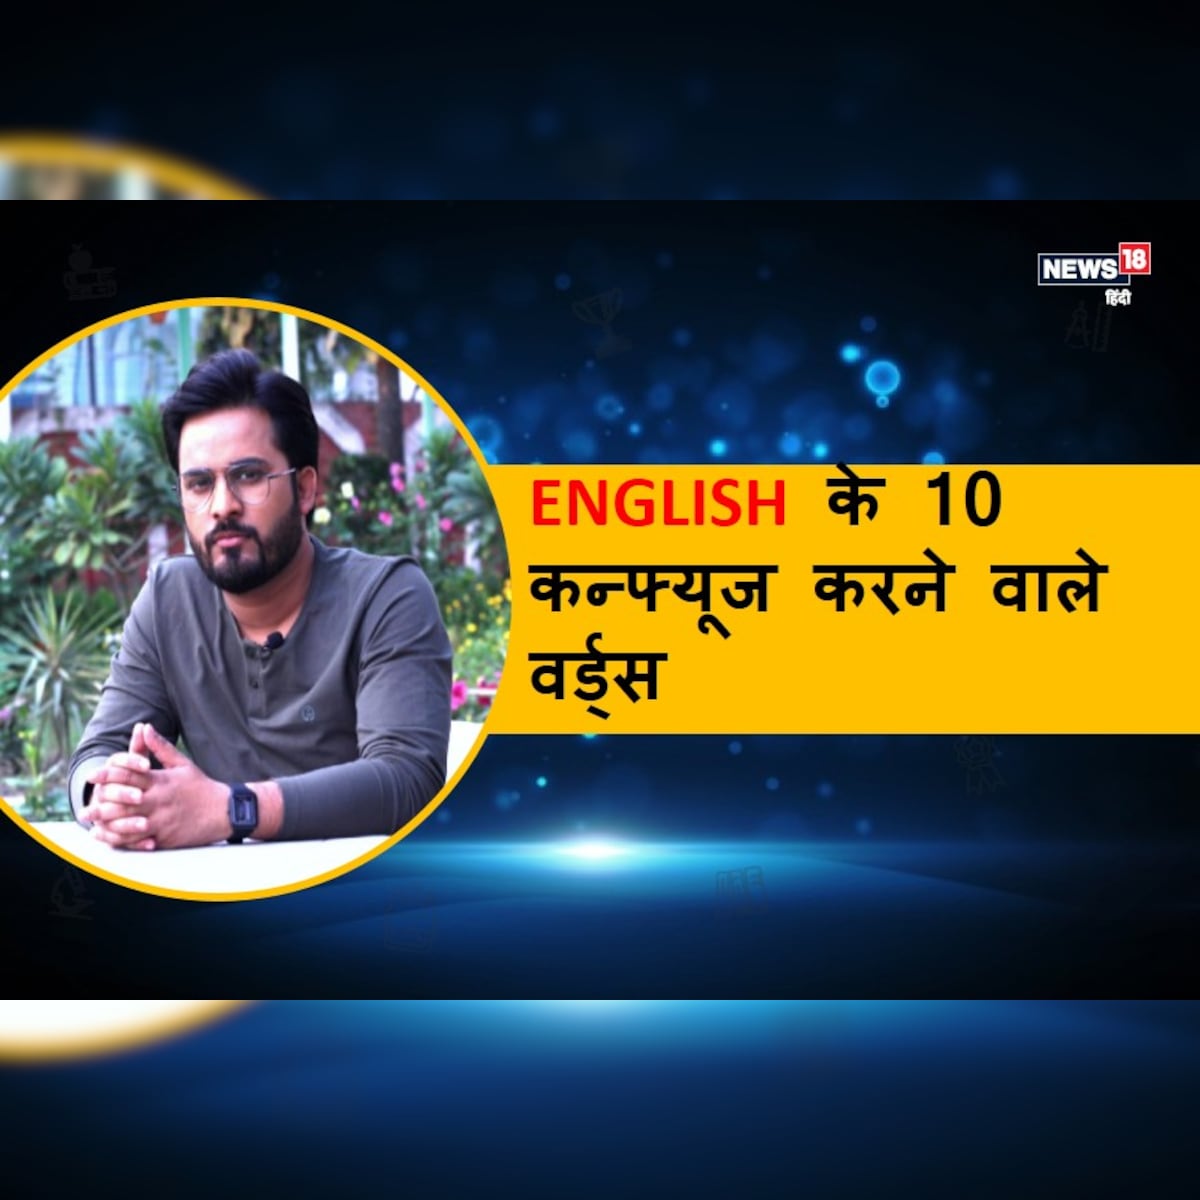 इ ग ल श क 10 वर ड ज स प ल ग स ल कर म न ग तक सबम कन फ य ज करत ह English Learning Watch Video And Learn About Words Which Confuse People In Meaning News18 ह द